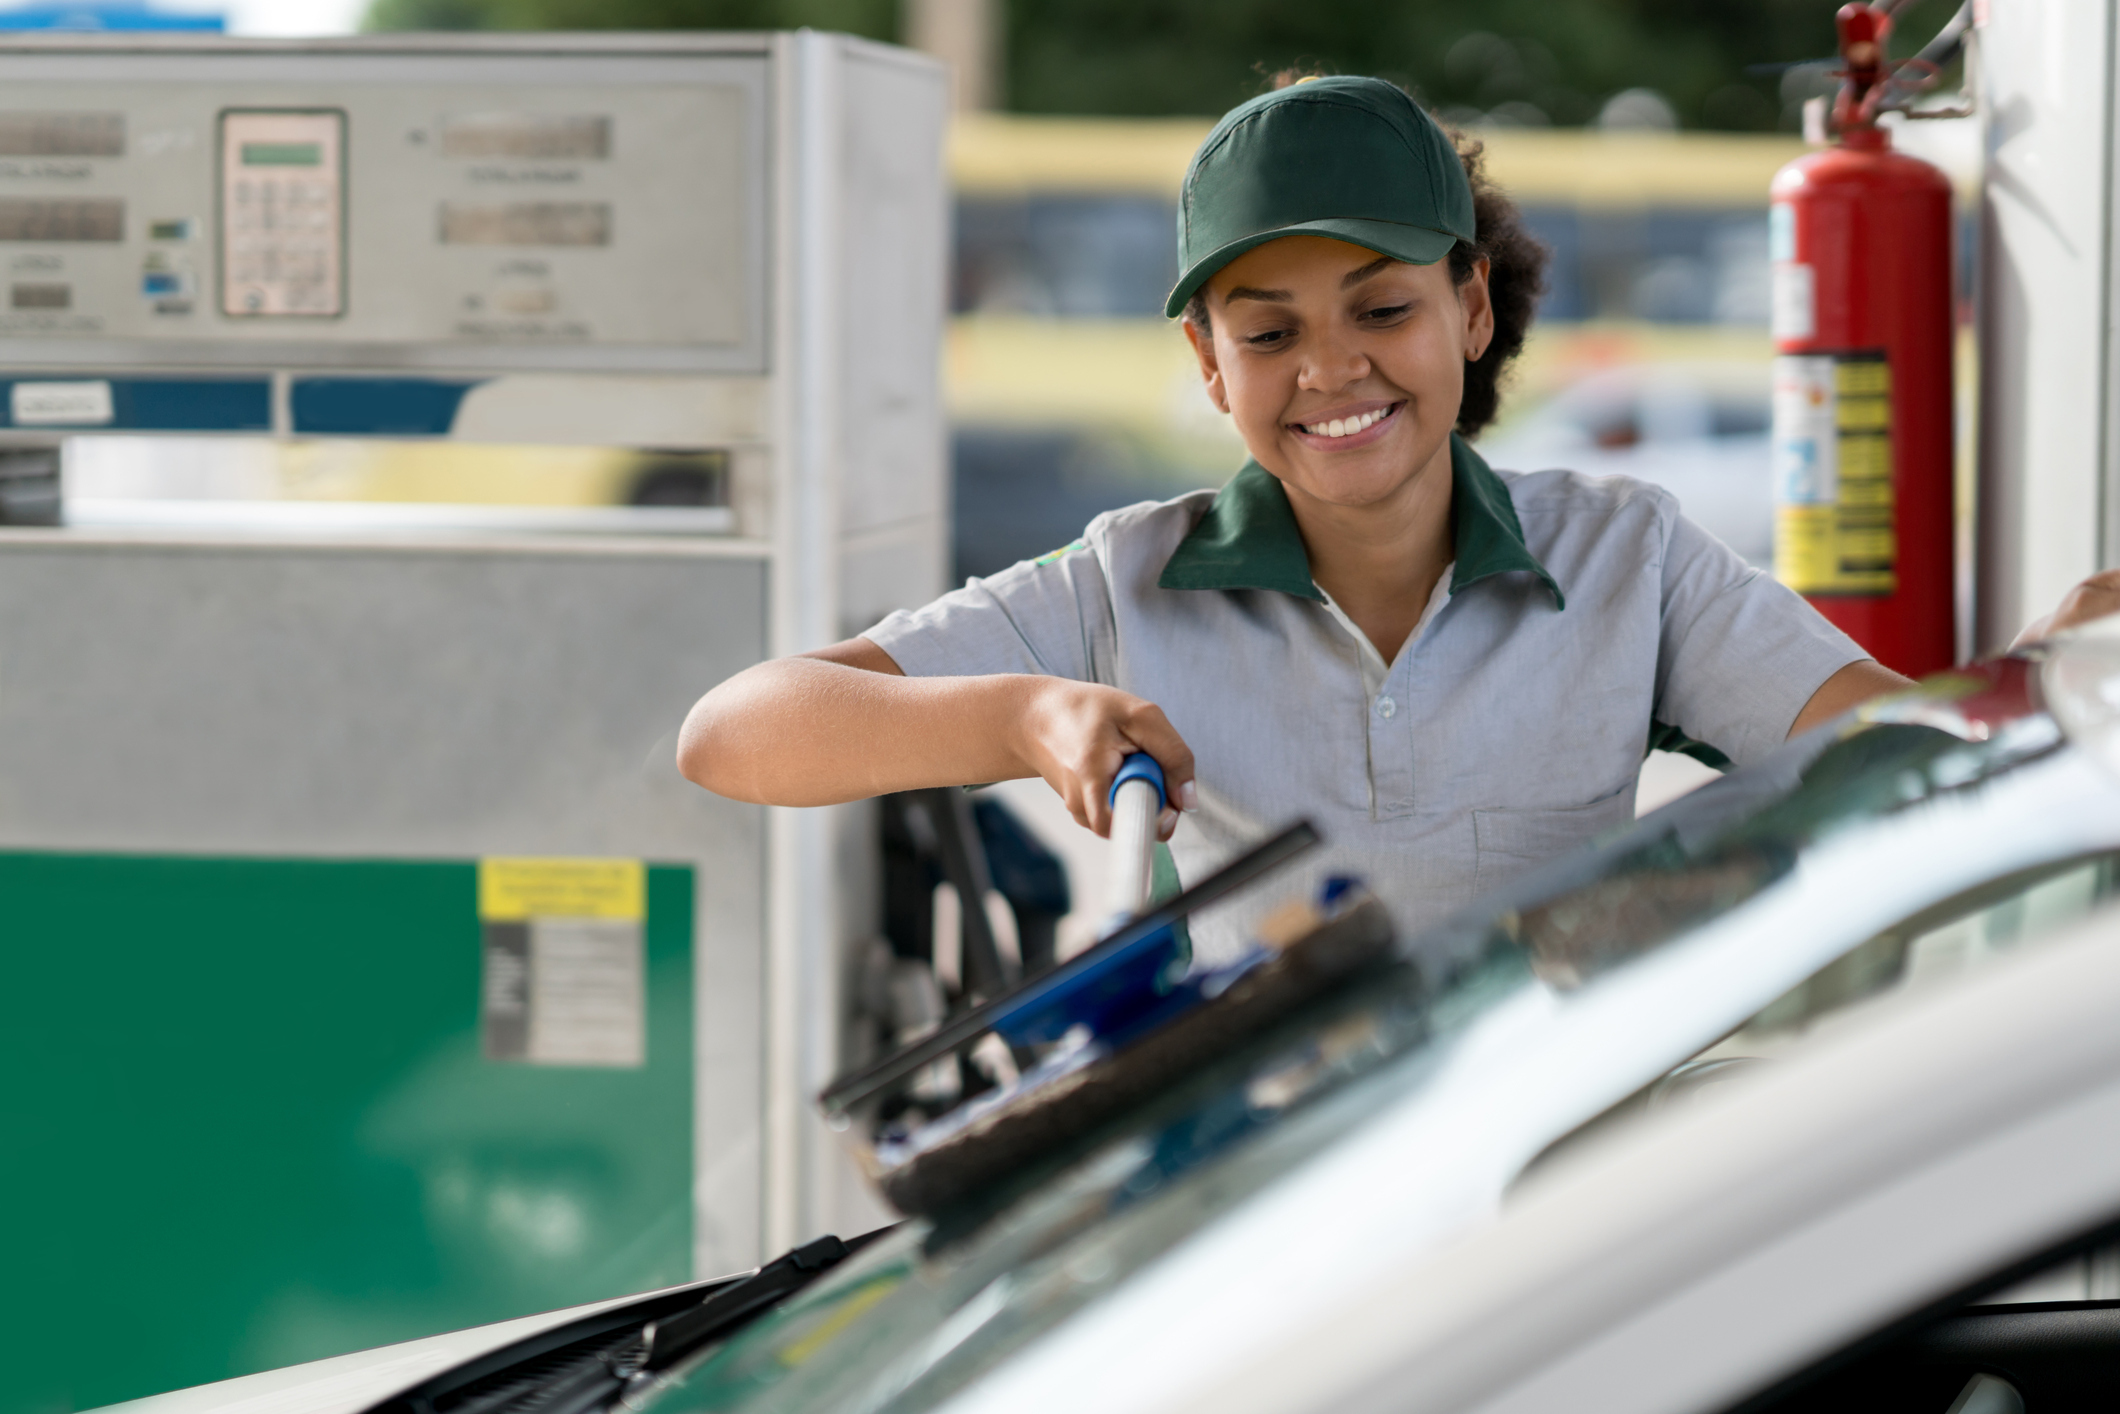 Employee helping a customer at a convenience and gas store